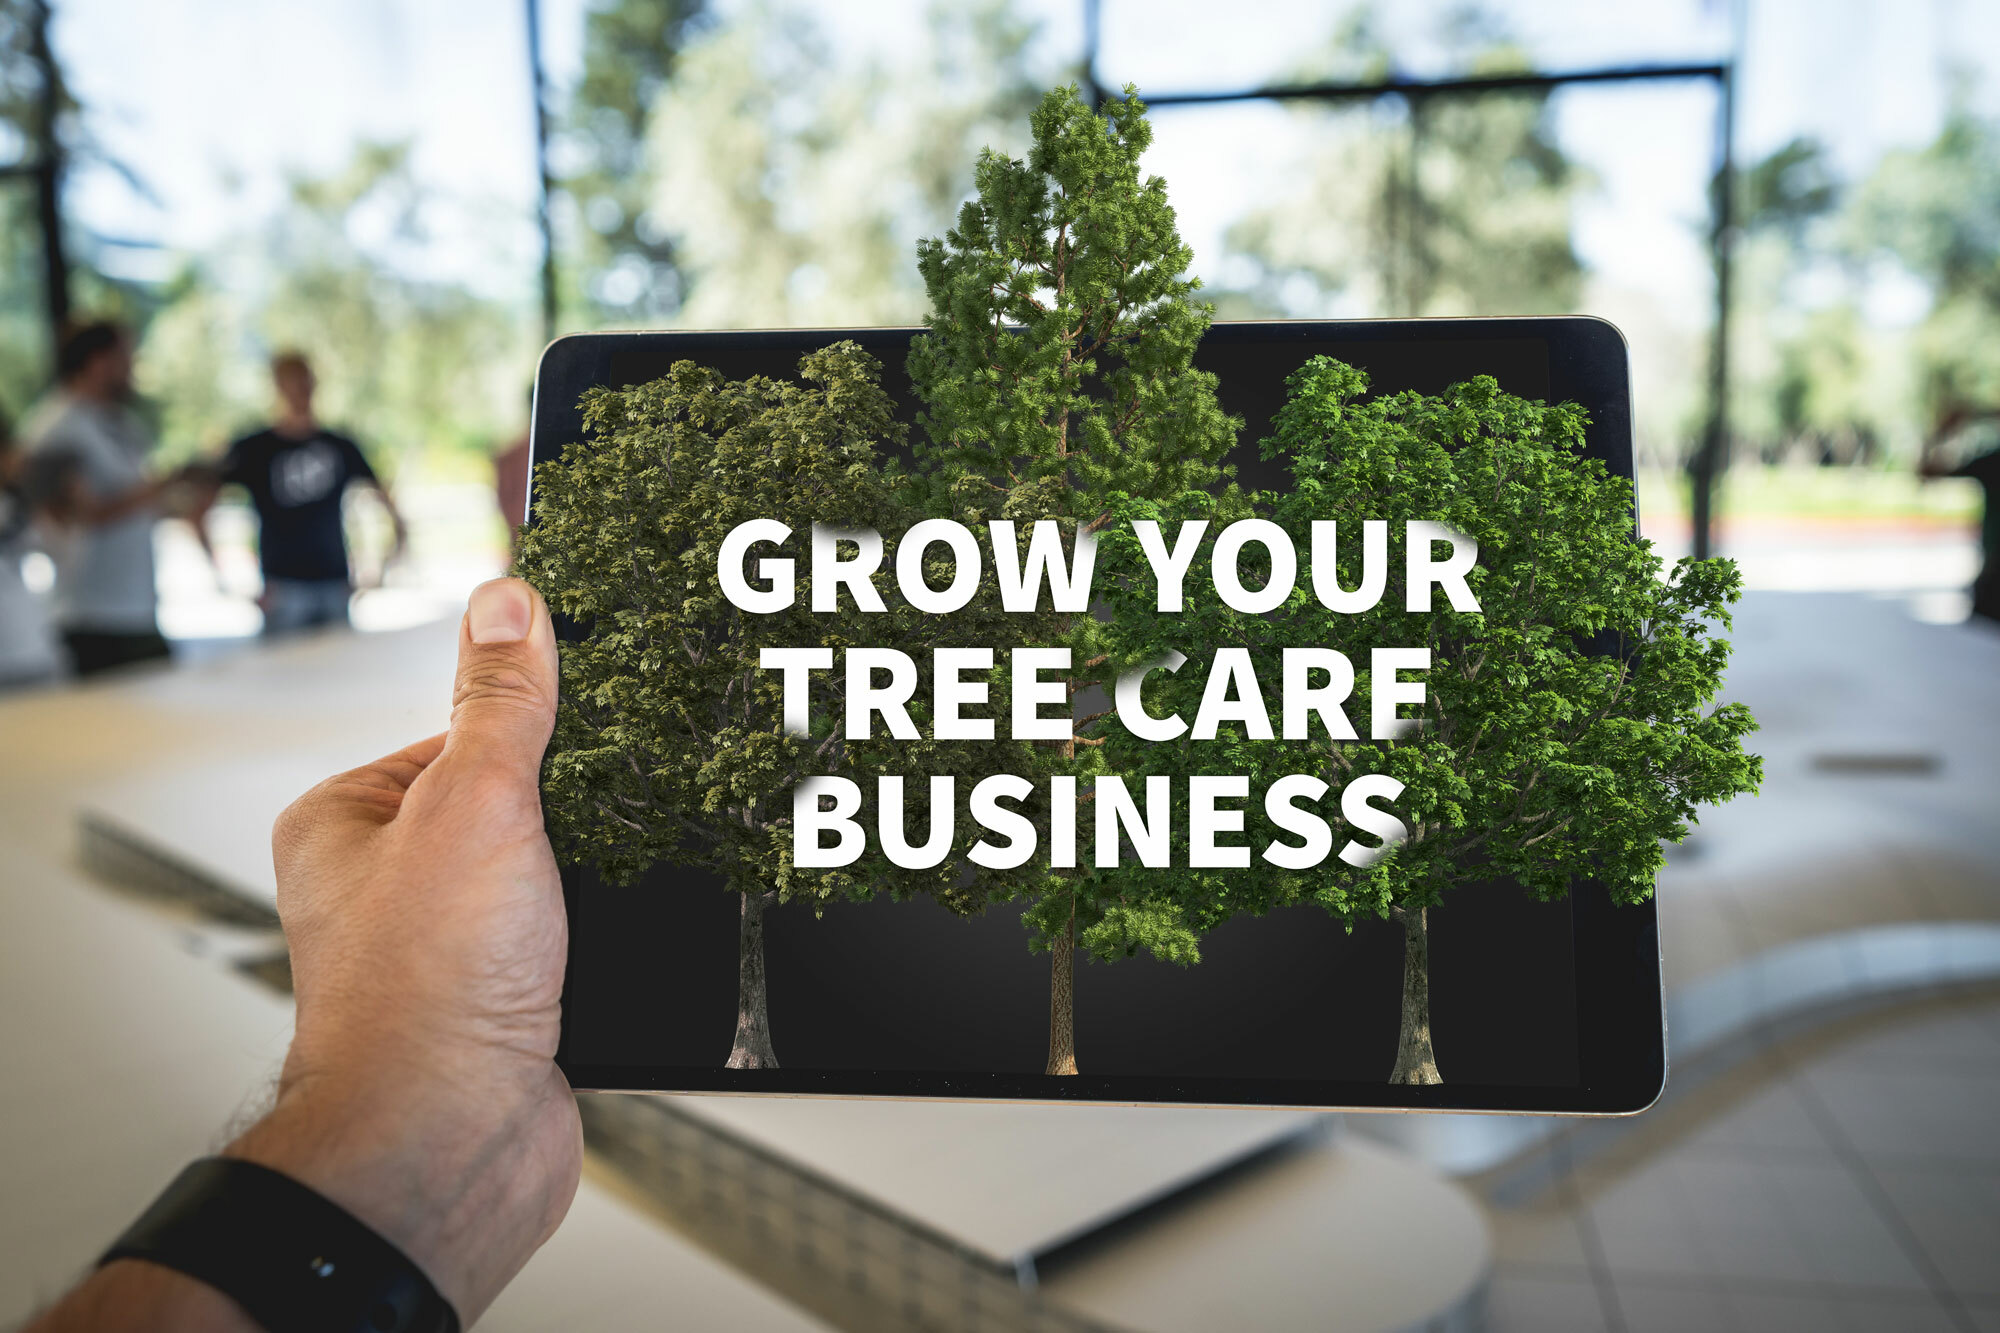 Top 3 Tips for Marketing Your Tree Service Business